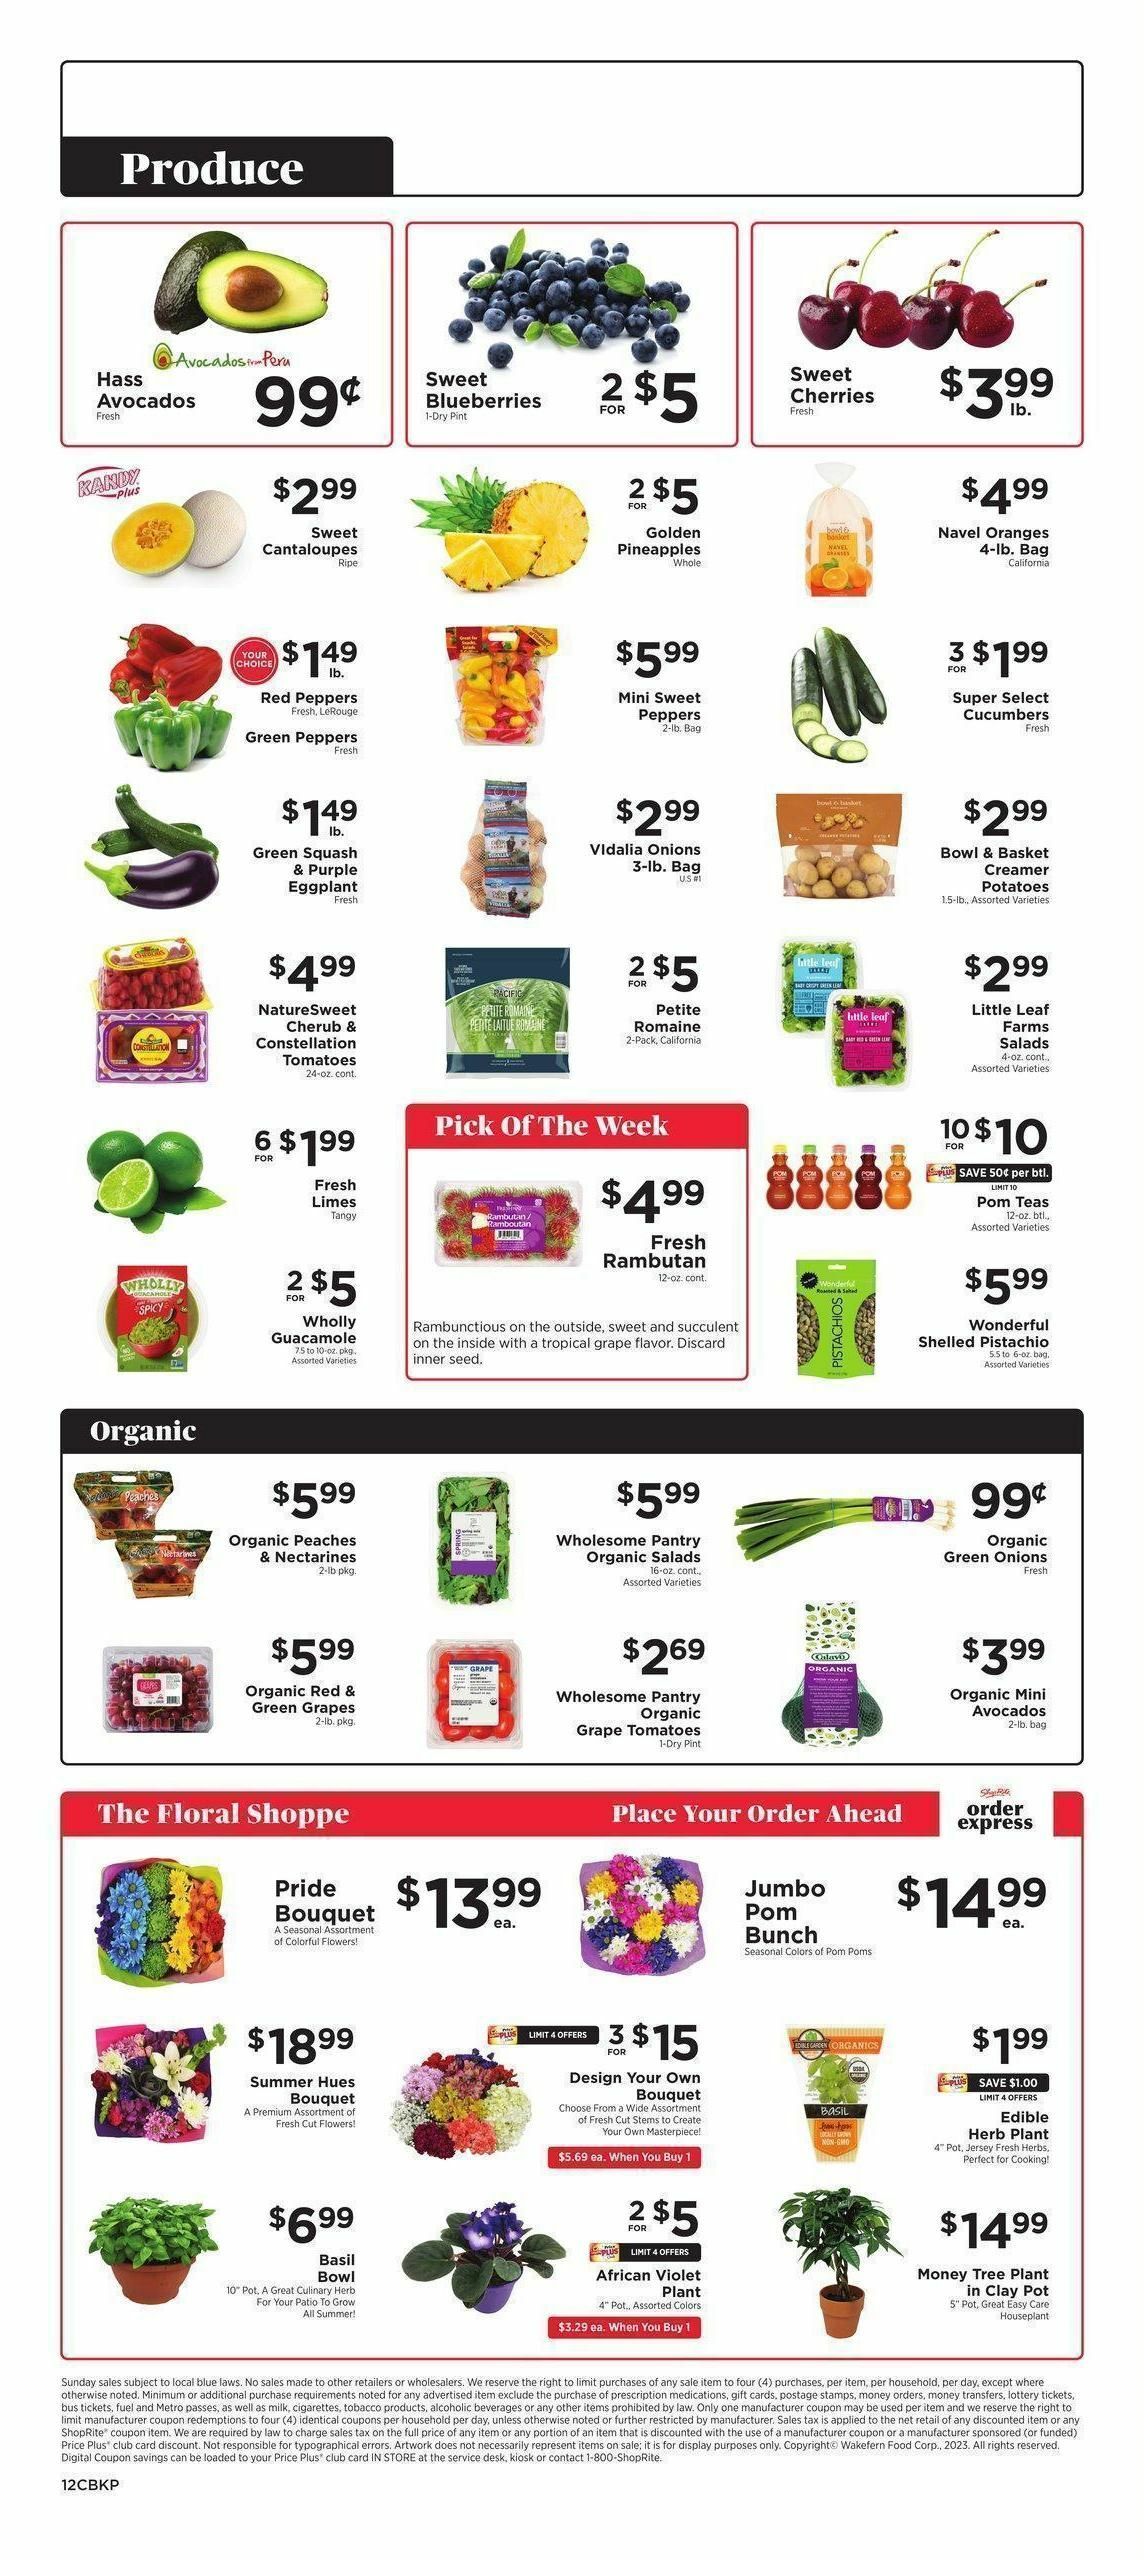 ShopRite Weekly Ad from June 23